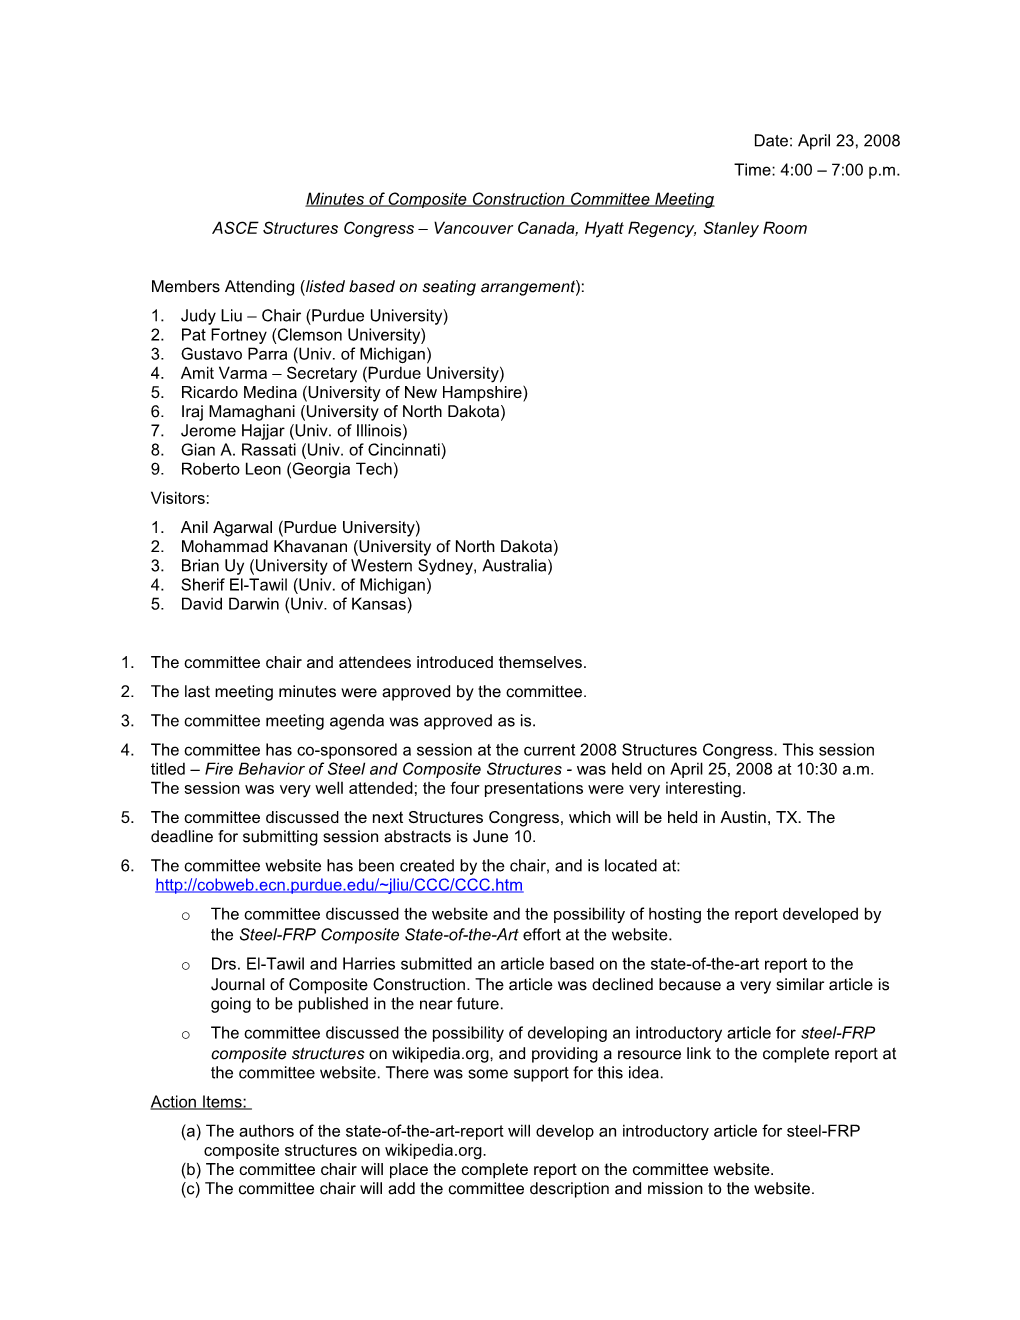 Minutes of Composite Construction Committee Meeting